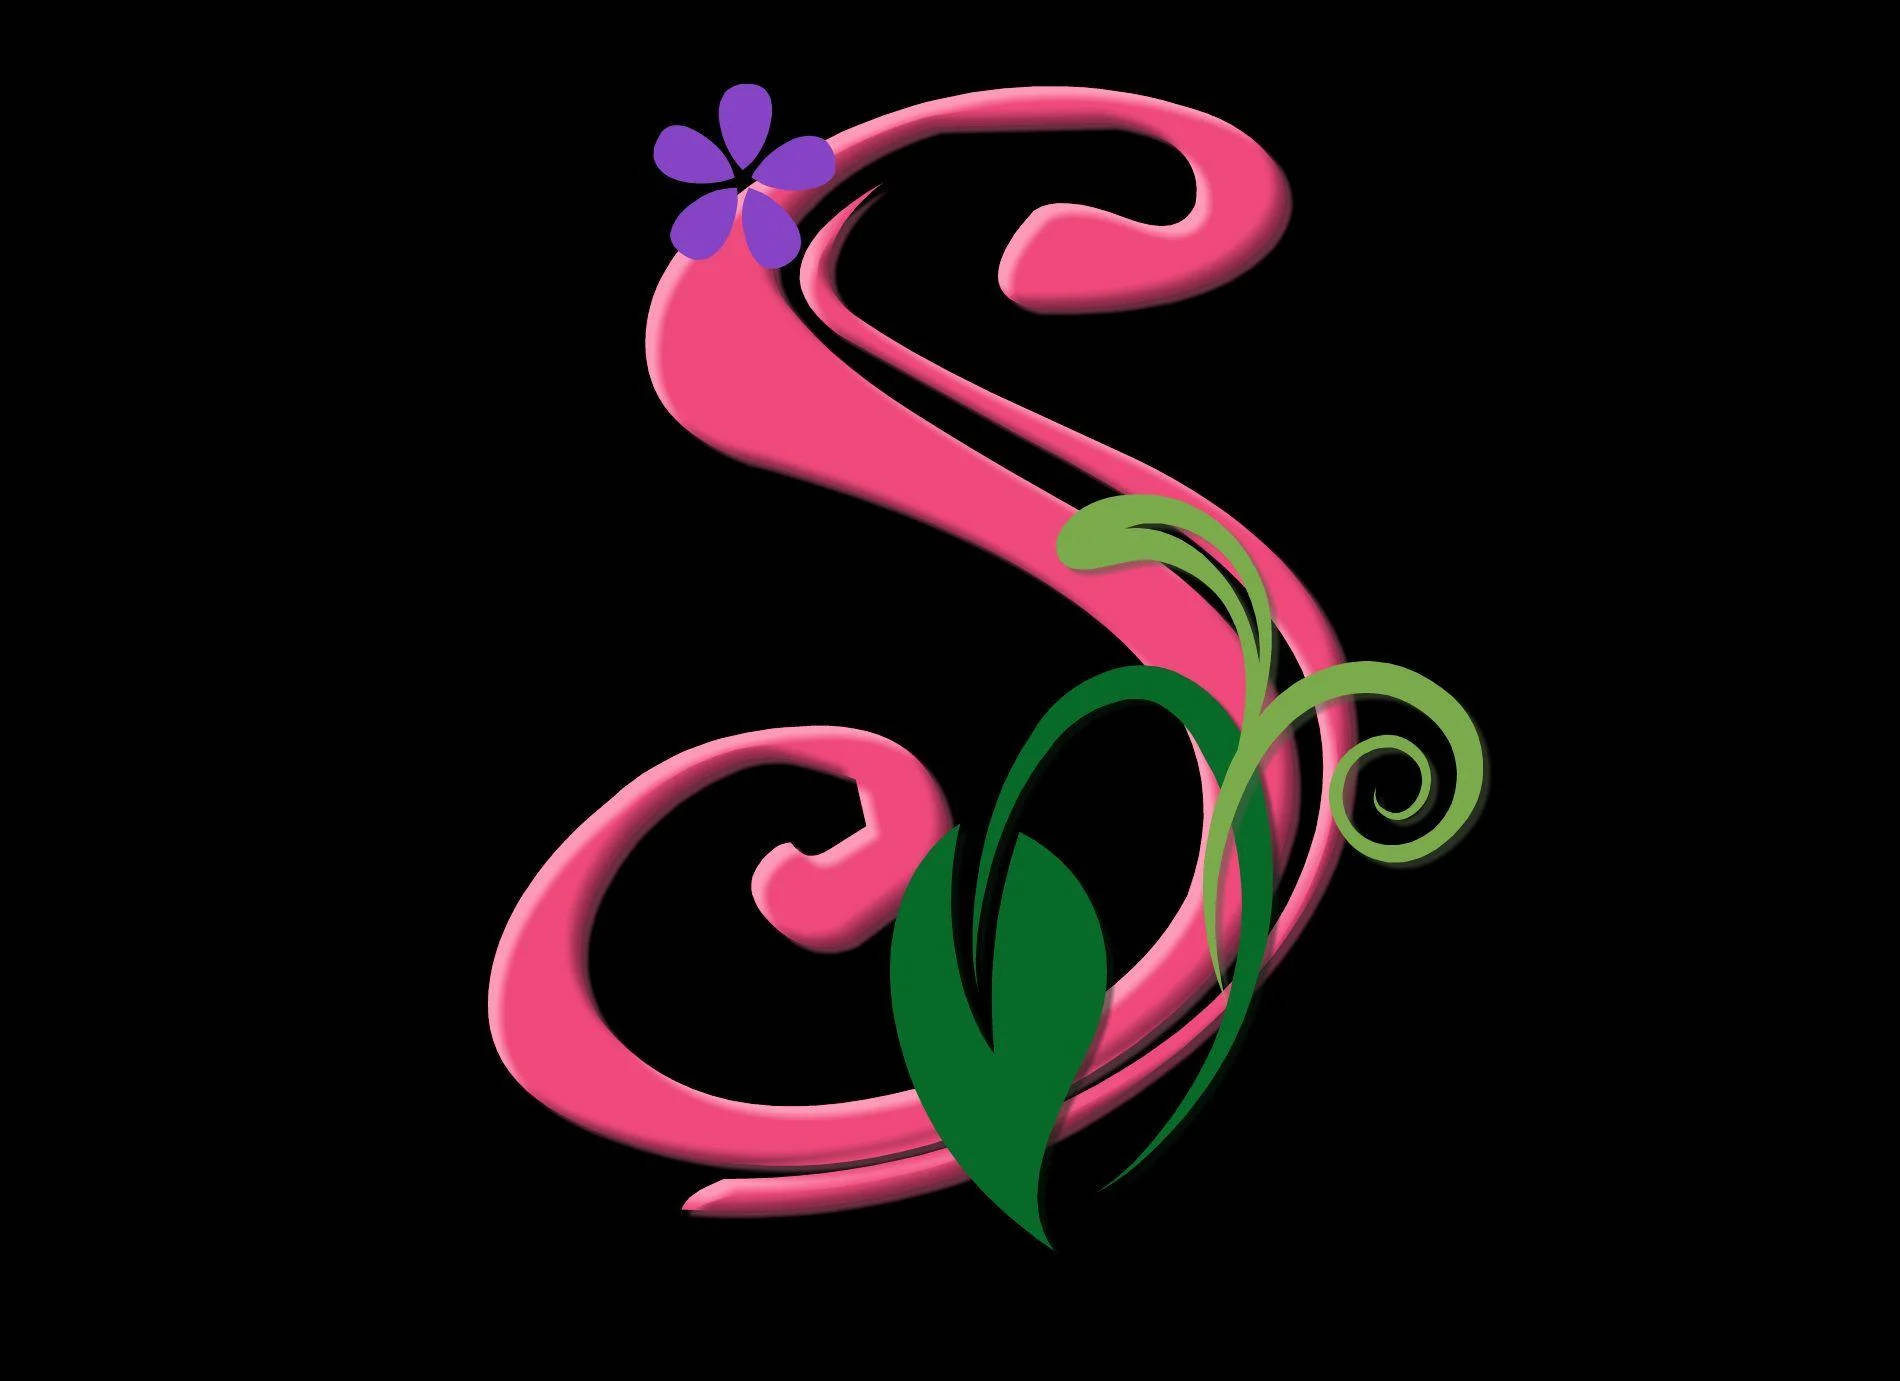 Download Letter S With Flower And Leaf Wallpaper 